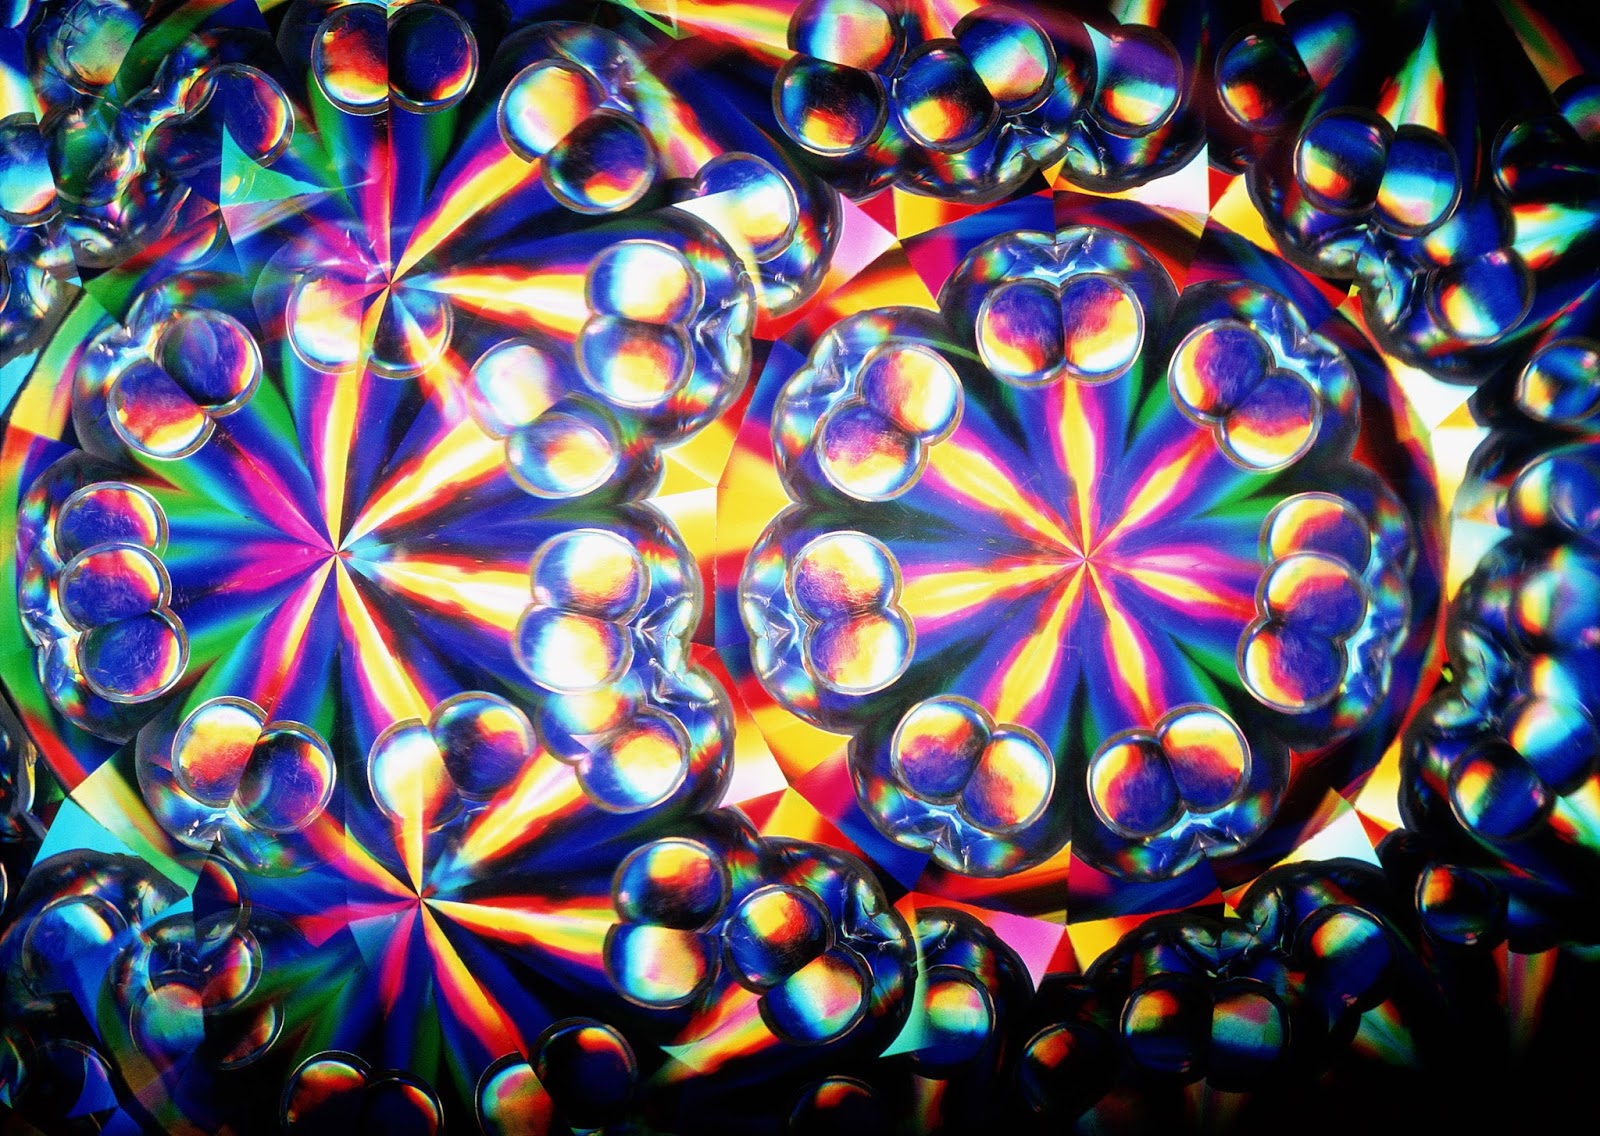 Free HD Images (FIFCU Purchased): Kaleidoscope HD Images